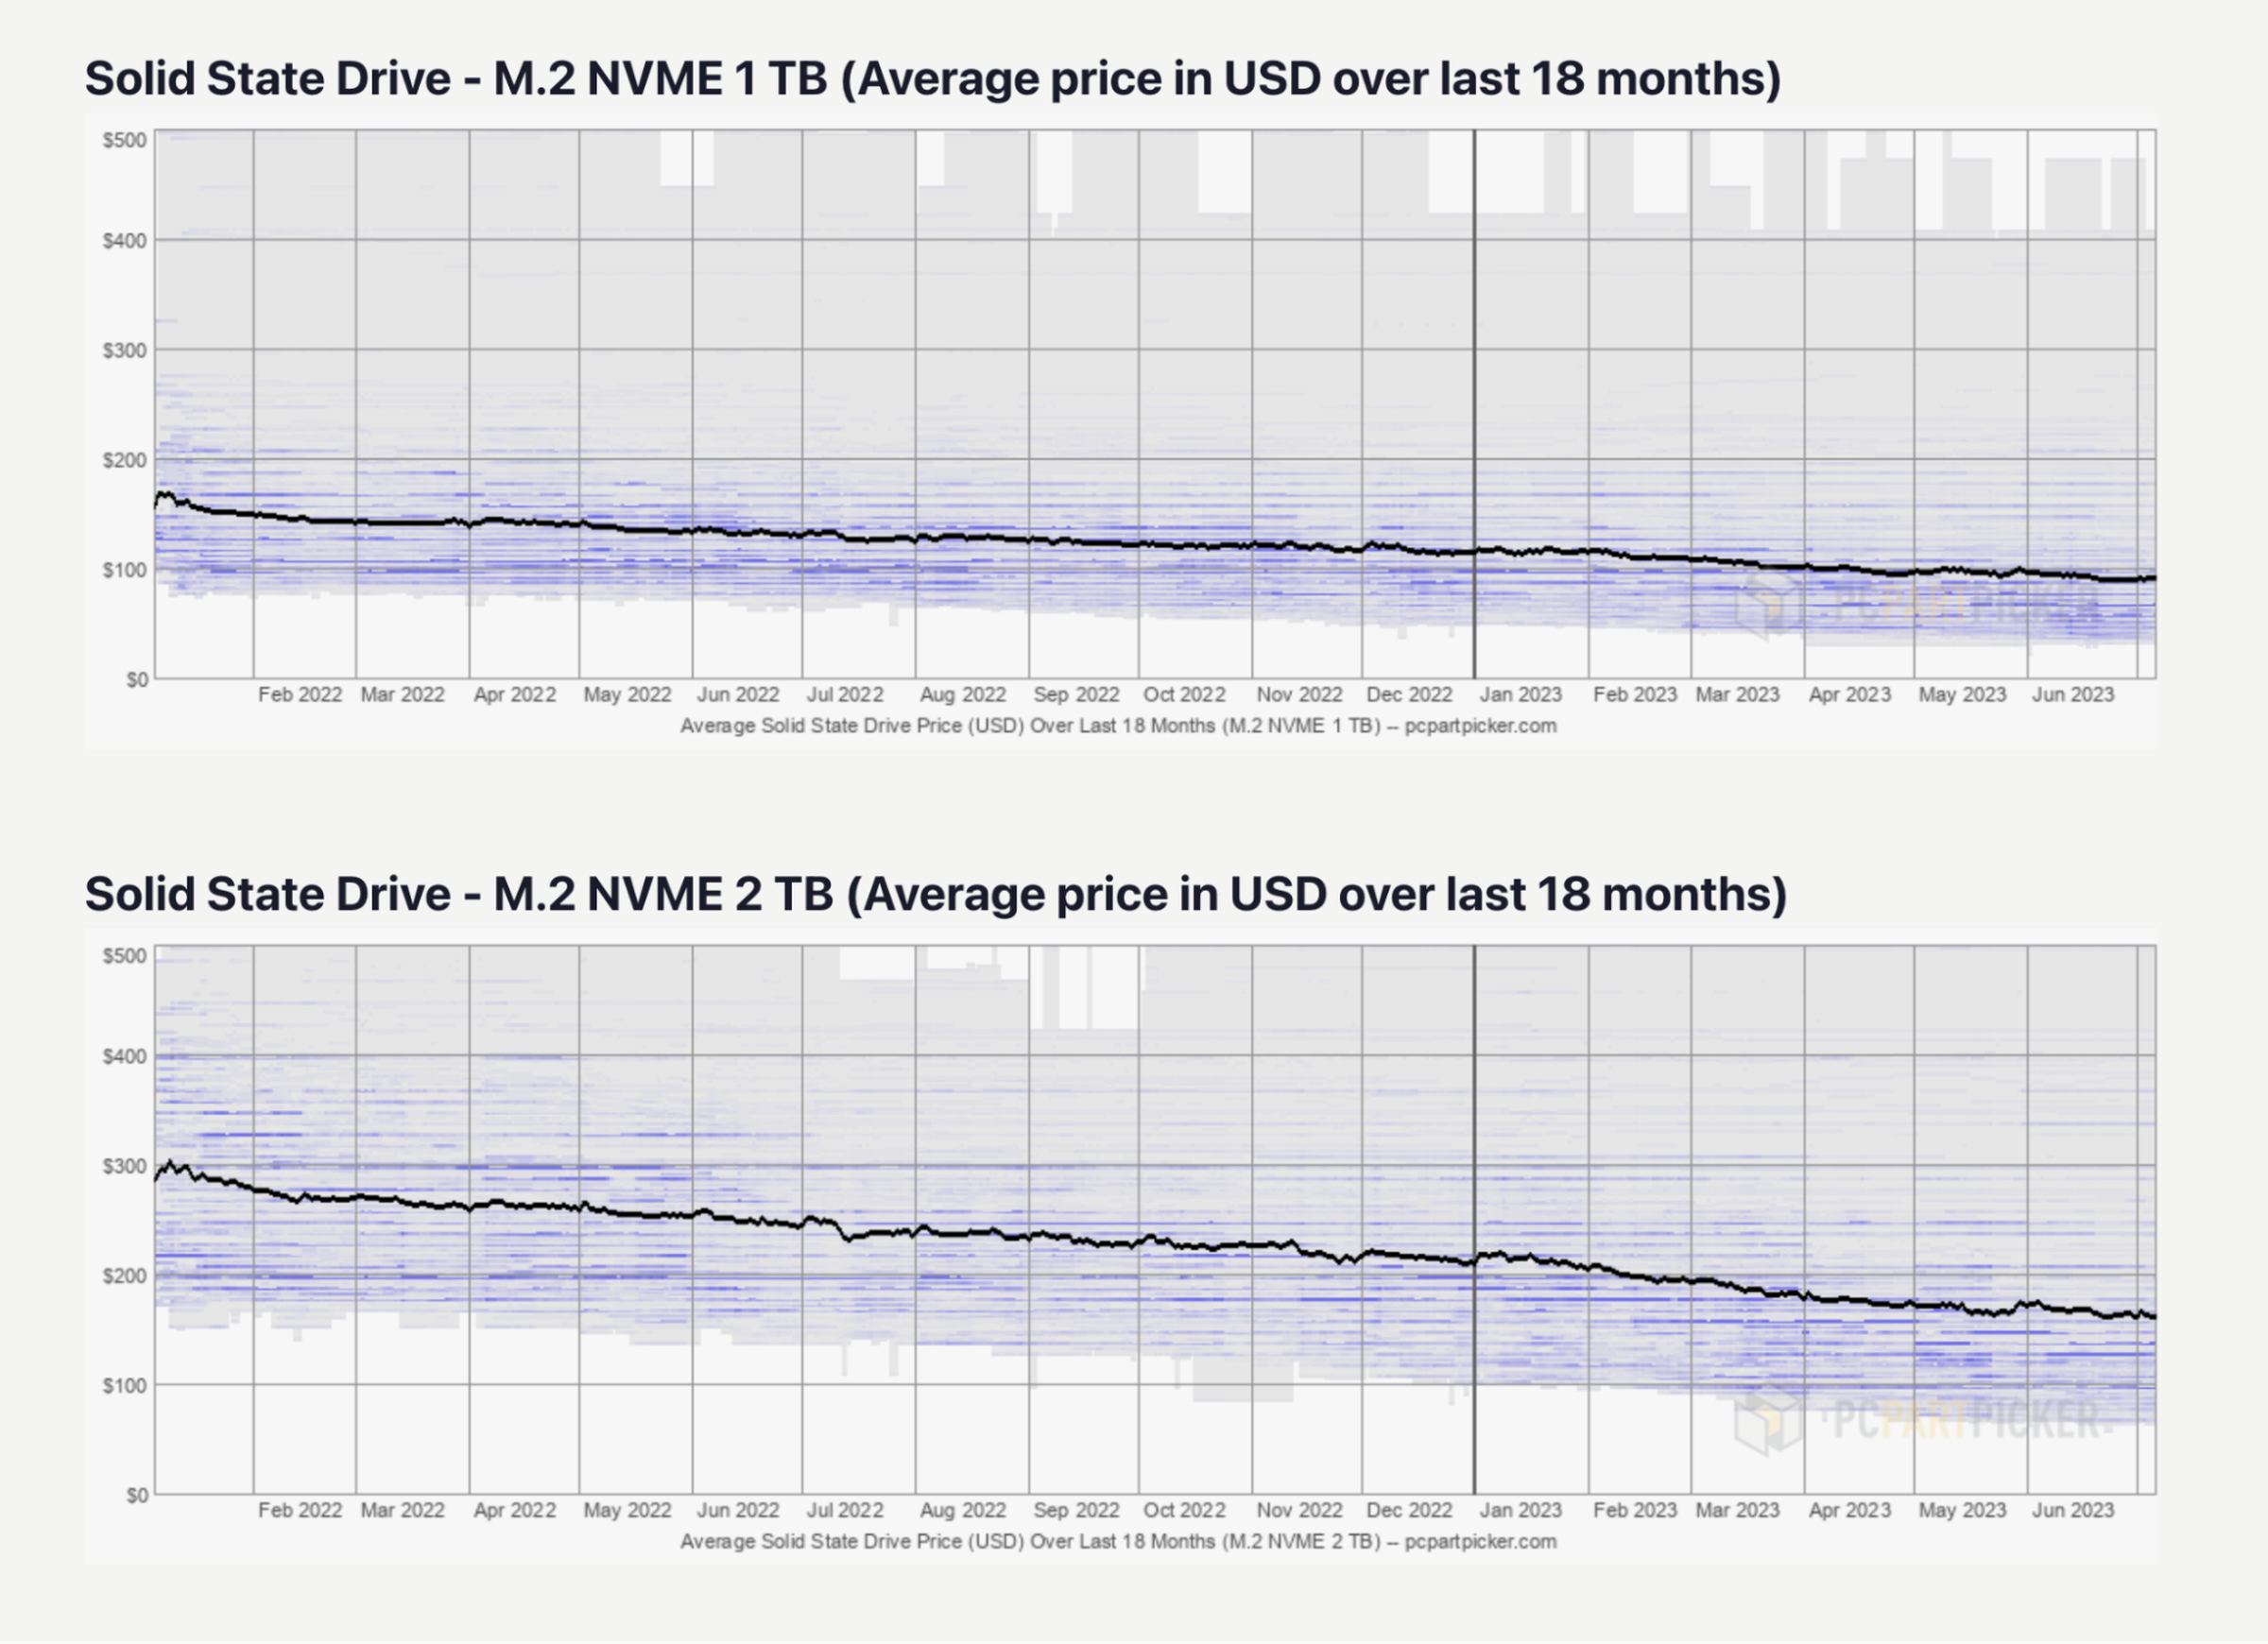 The pricing of 2TB NVMe drives has dropped a little steeper than 1TB models.